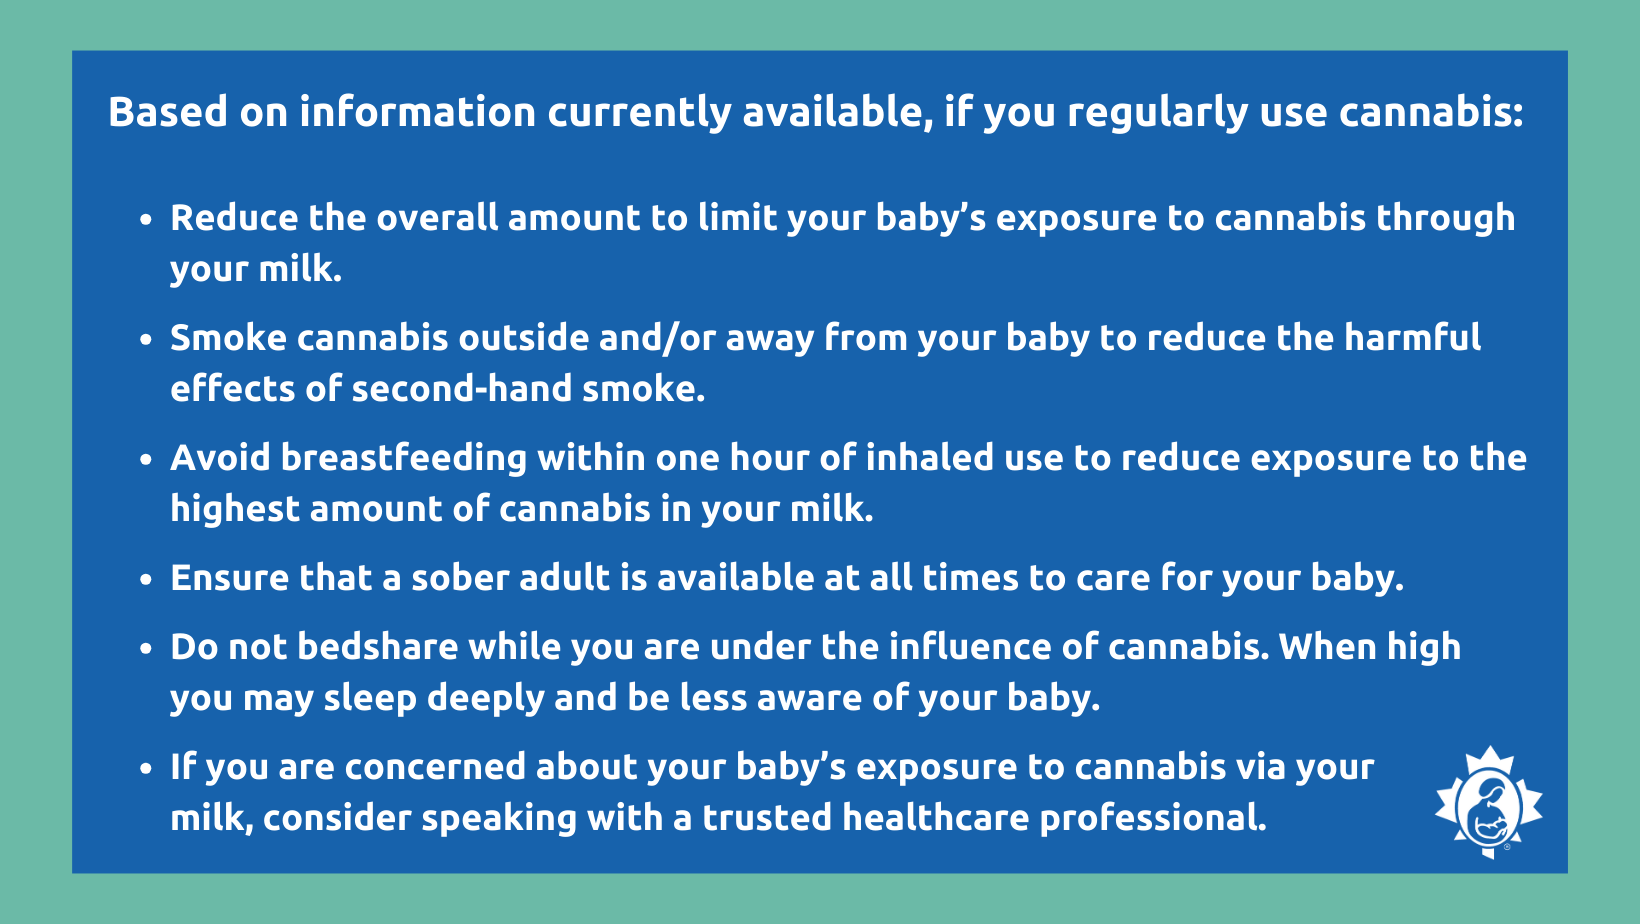 Cannabis and breastfeeding recommendations